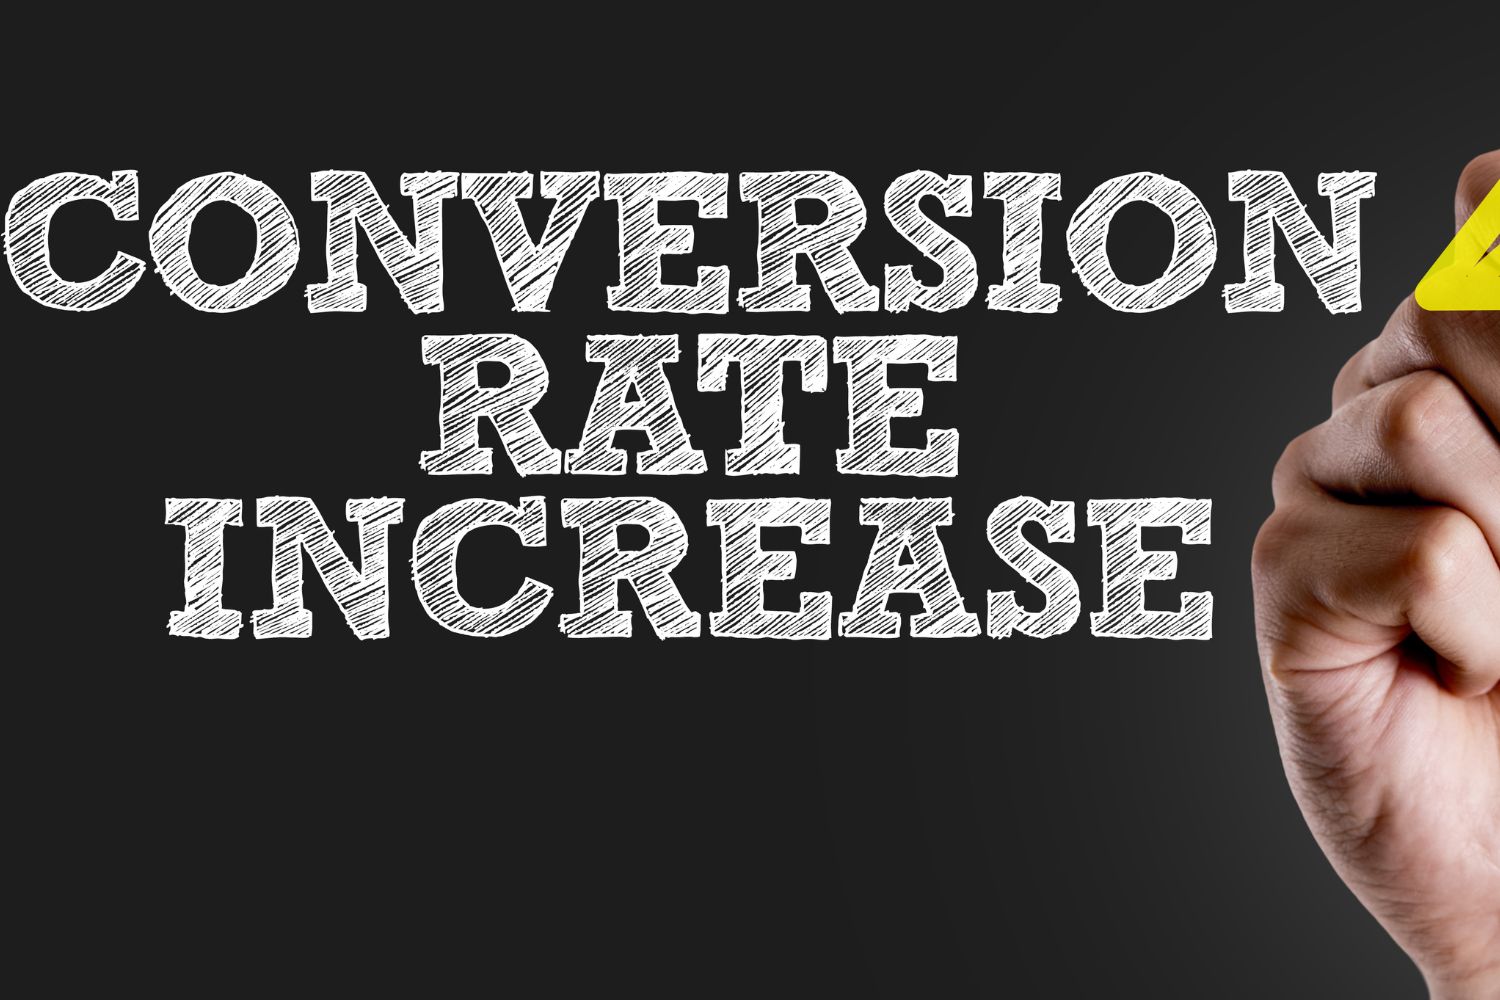 How to increase patient conversion rates